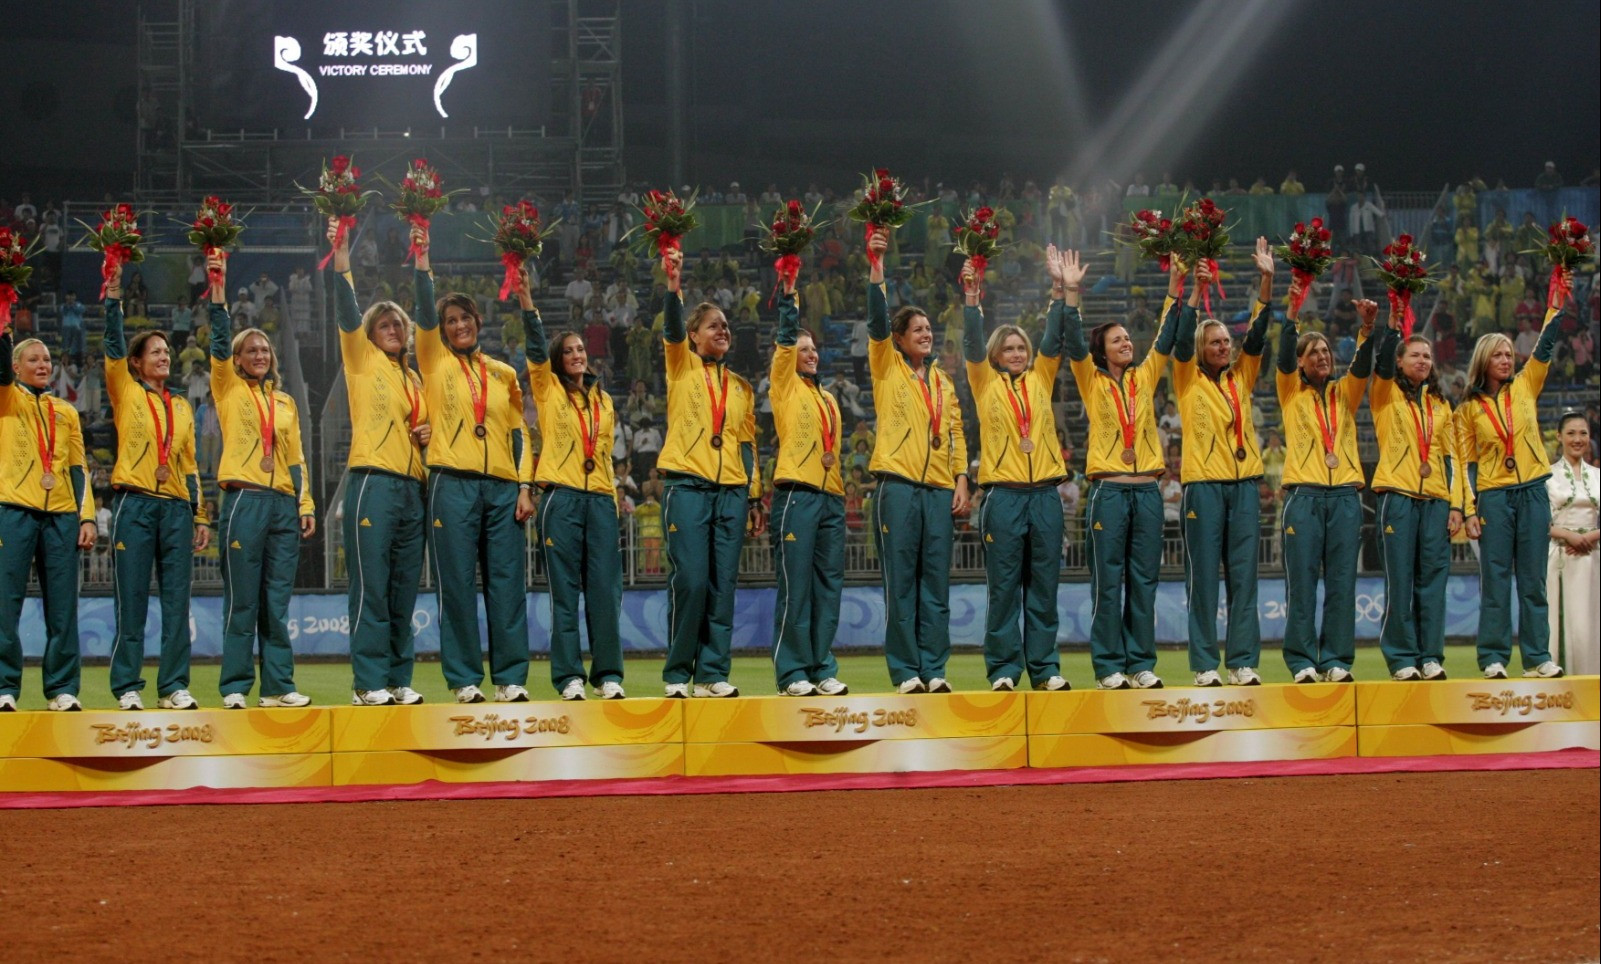 Australia has enjoyed success in the baseball and softball Olympic stage combining for five Olympic medals, including two in Athens 2004 and a softball bronze medal at Beijing 2008